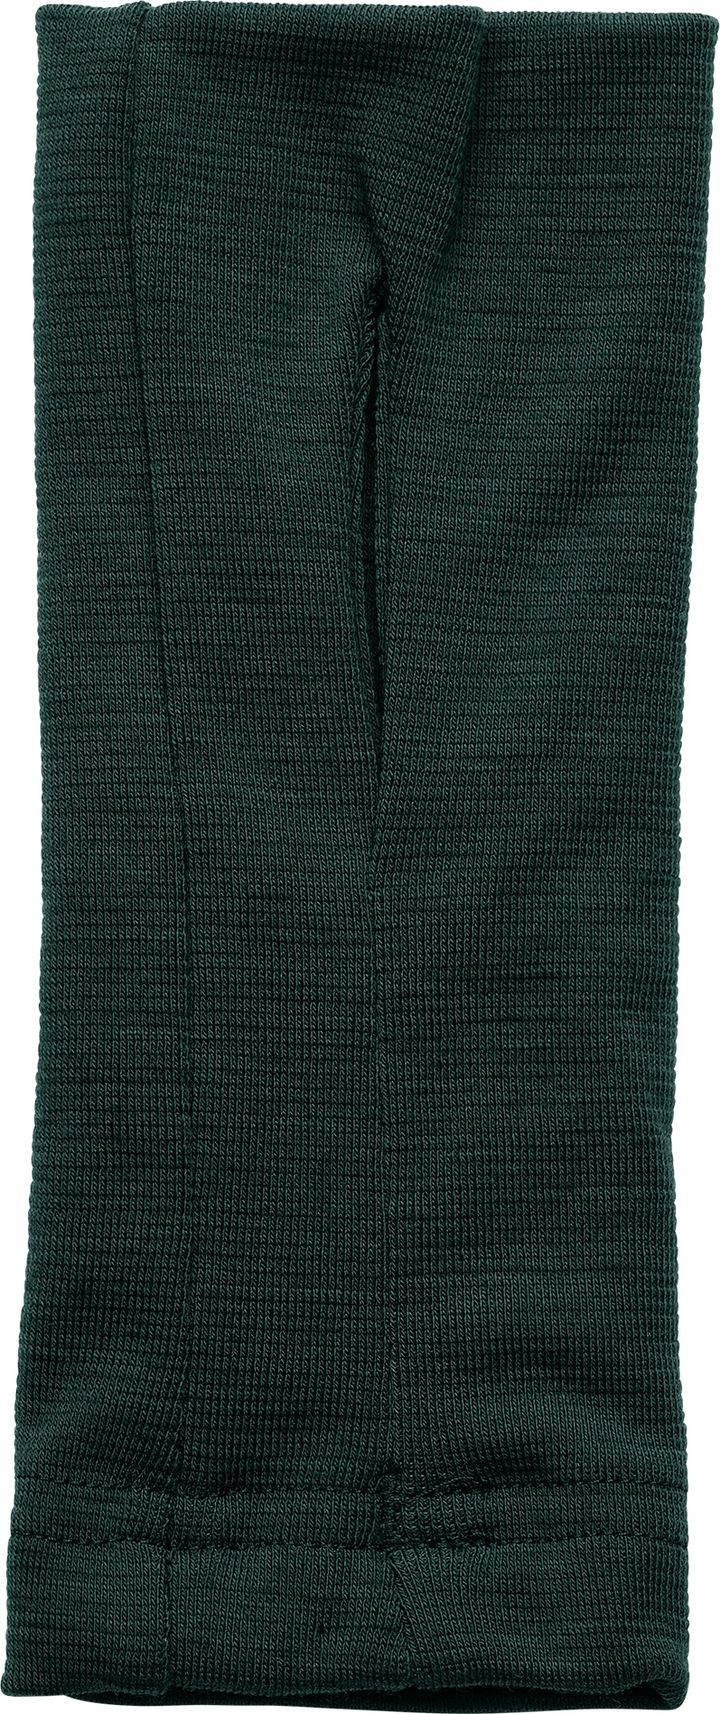 Aclima WarmWool Pulseheater Green Gables Aclima